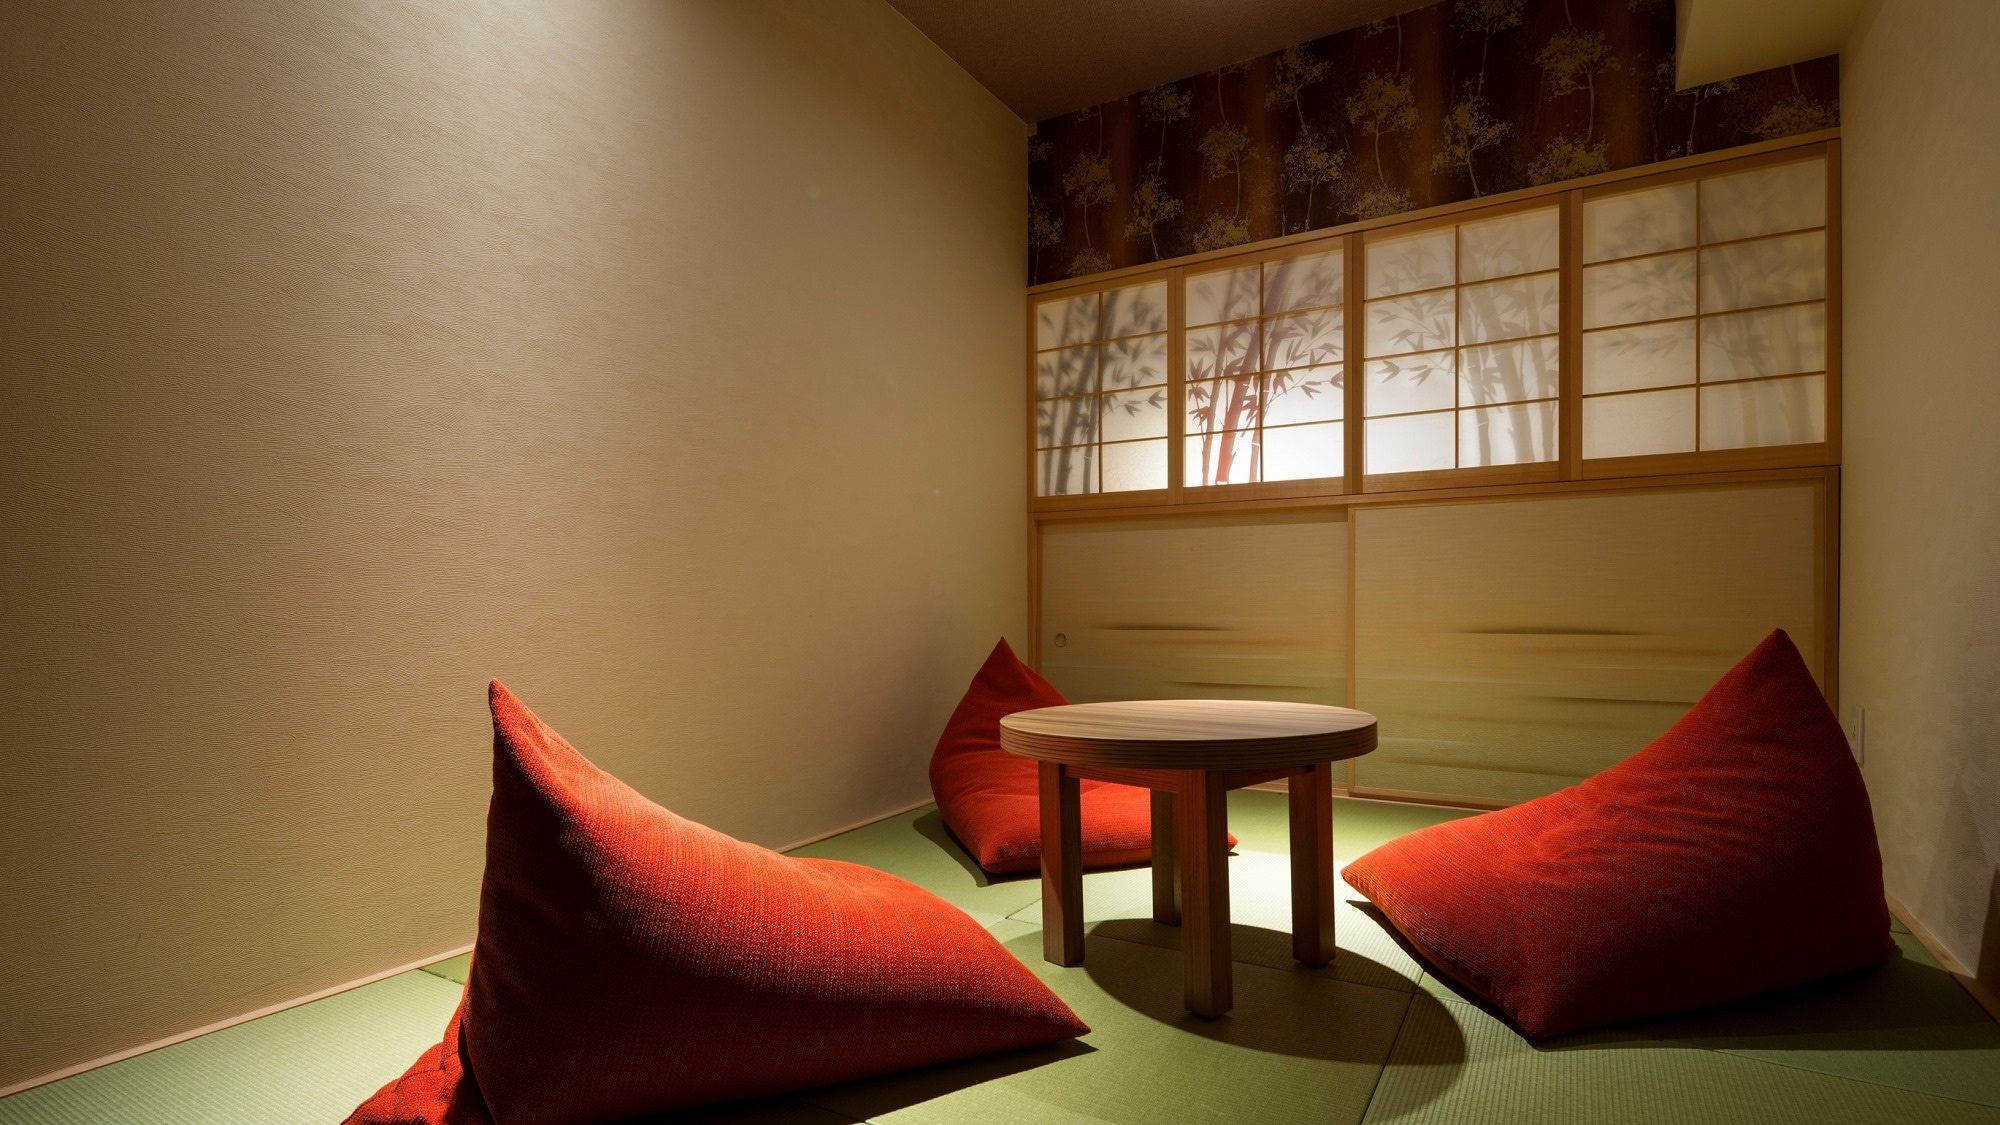 ◆Grand Suite | A Japanese-style room where you can stretch your legs and relax.